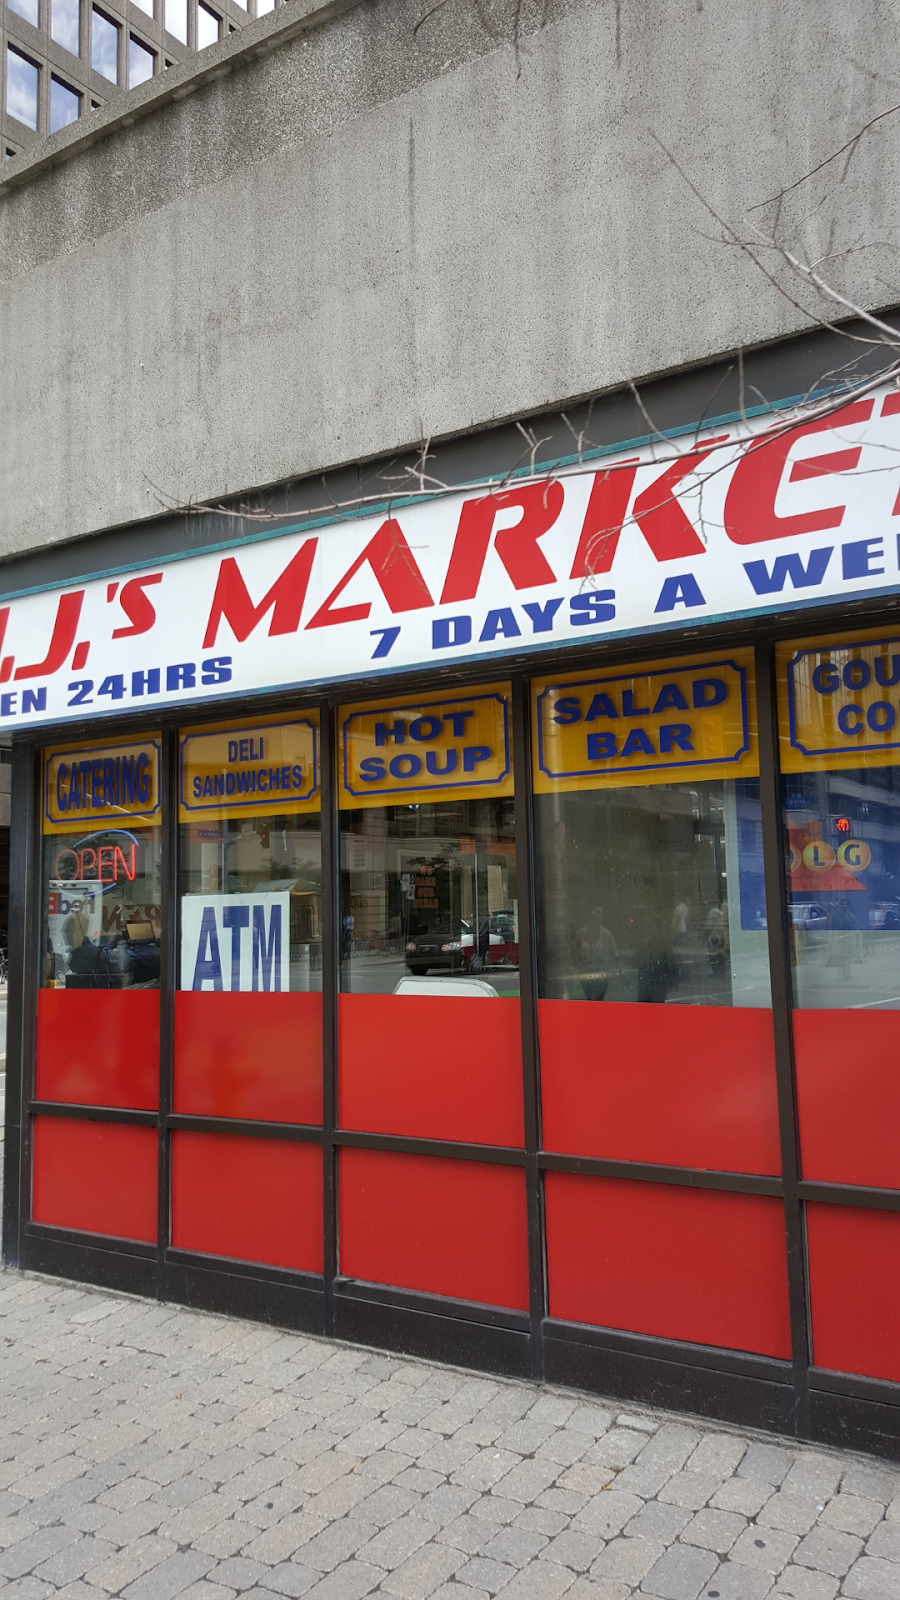 JJs Market | convenience store | 380 Laurier Ave W, Ottawa, ON K1P 5K3, Canada | 6132368914 OR +1 613-236-8914